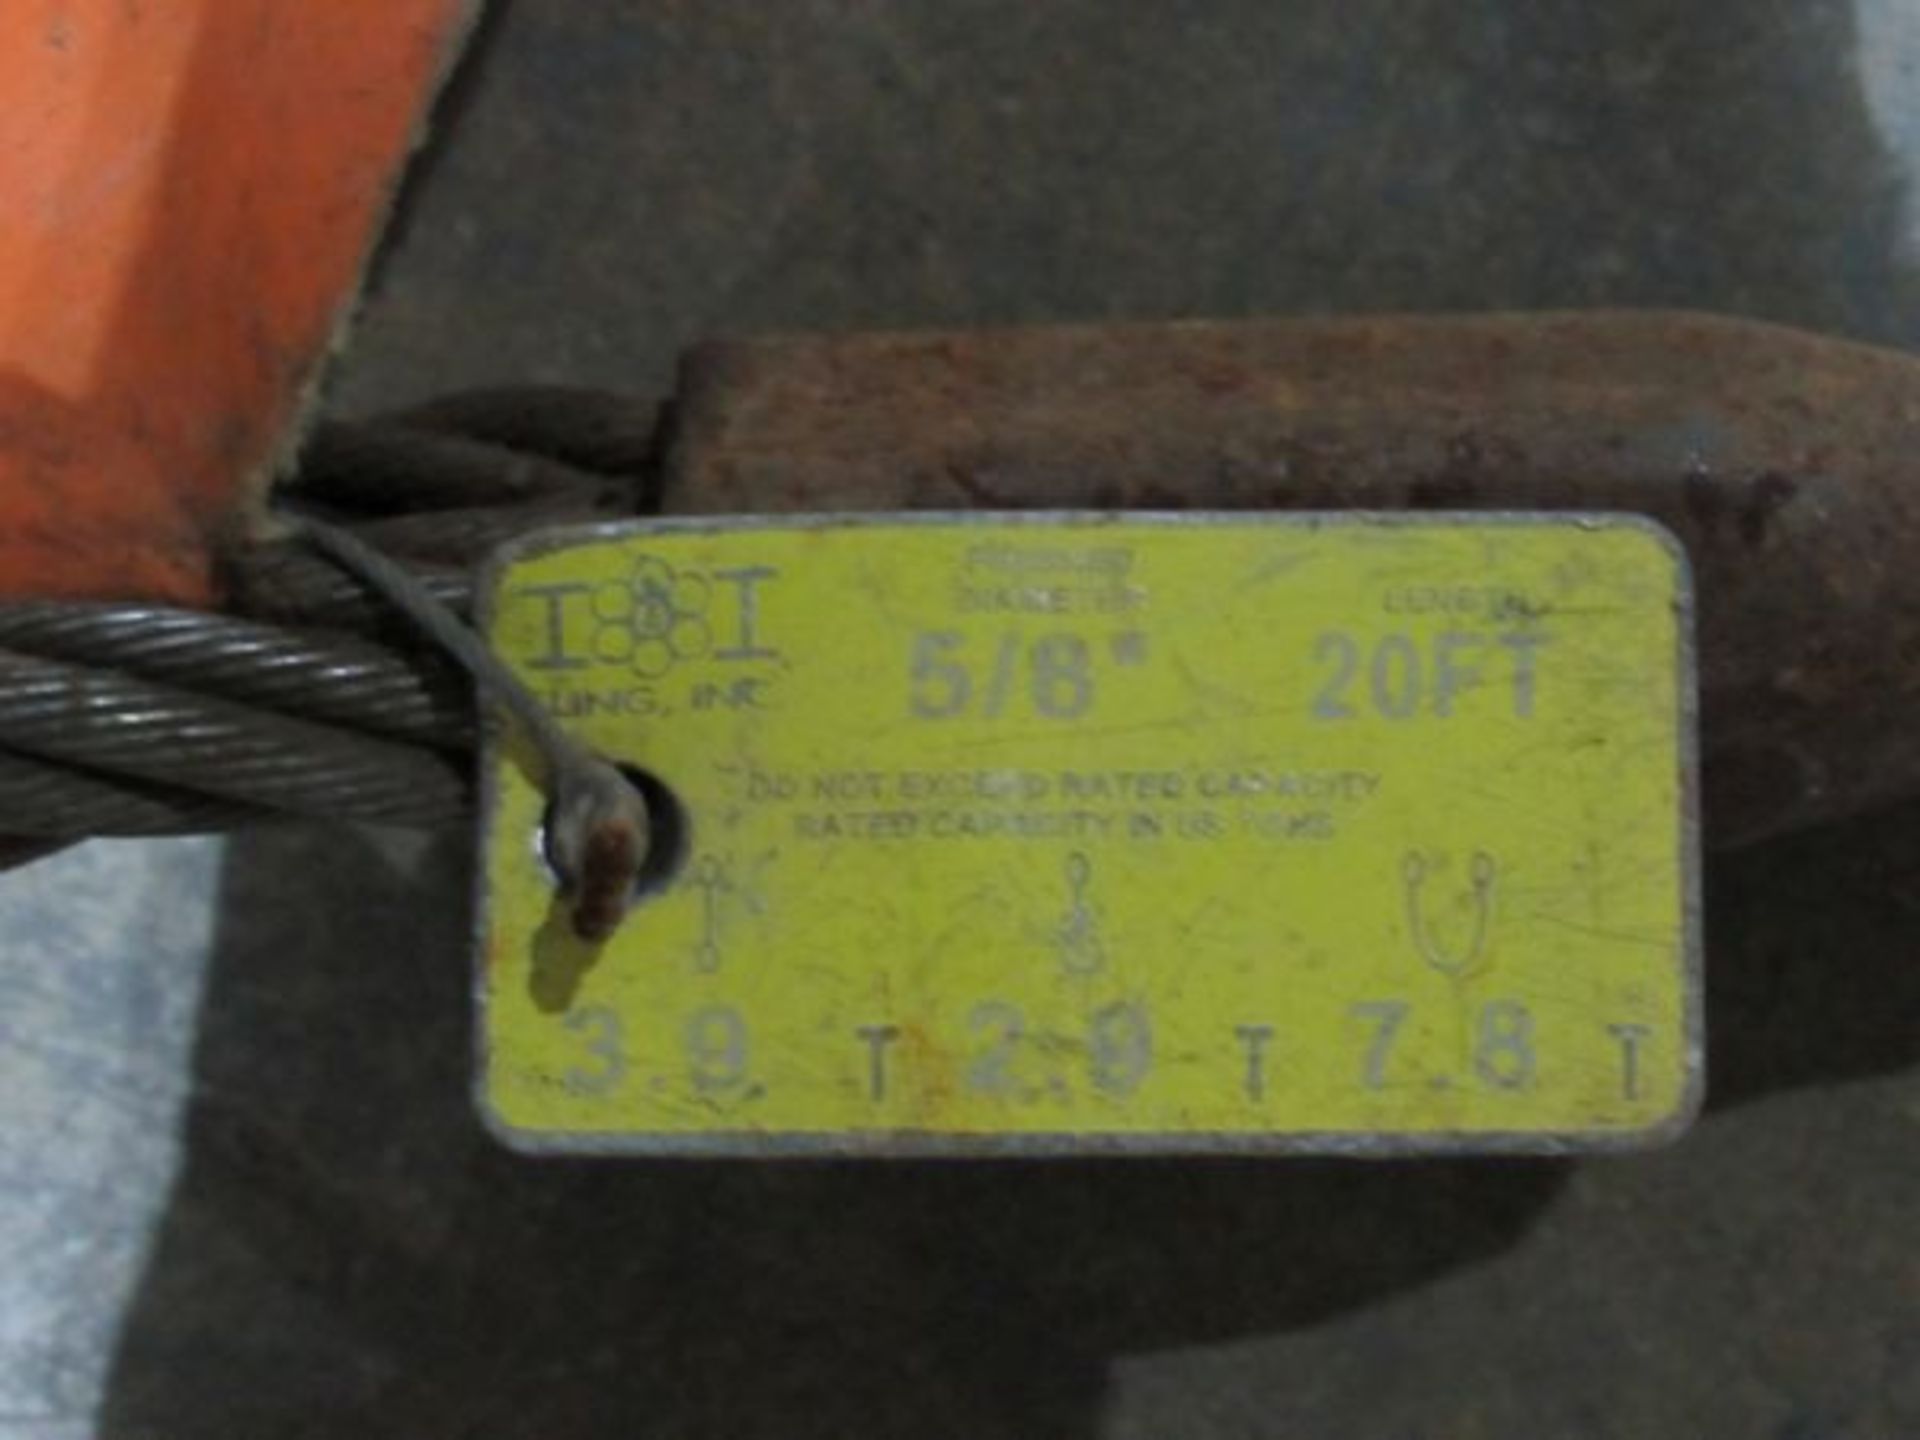 Assorted Braided Steel Lifting Slings- MFR - Total Tool, Lindi Sling Sizes Range From 3/8" to 1" - Image 7 of 20